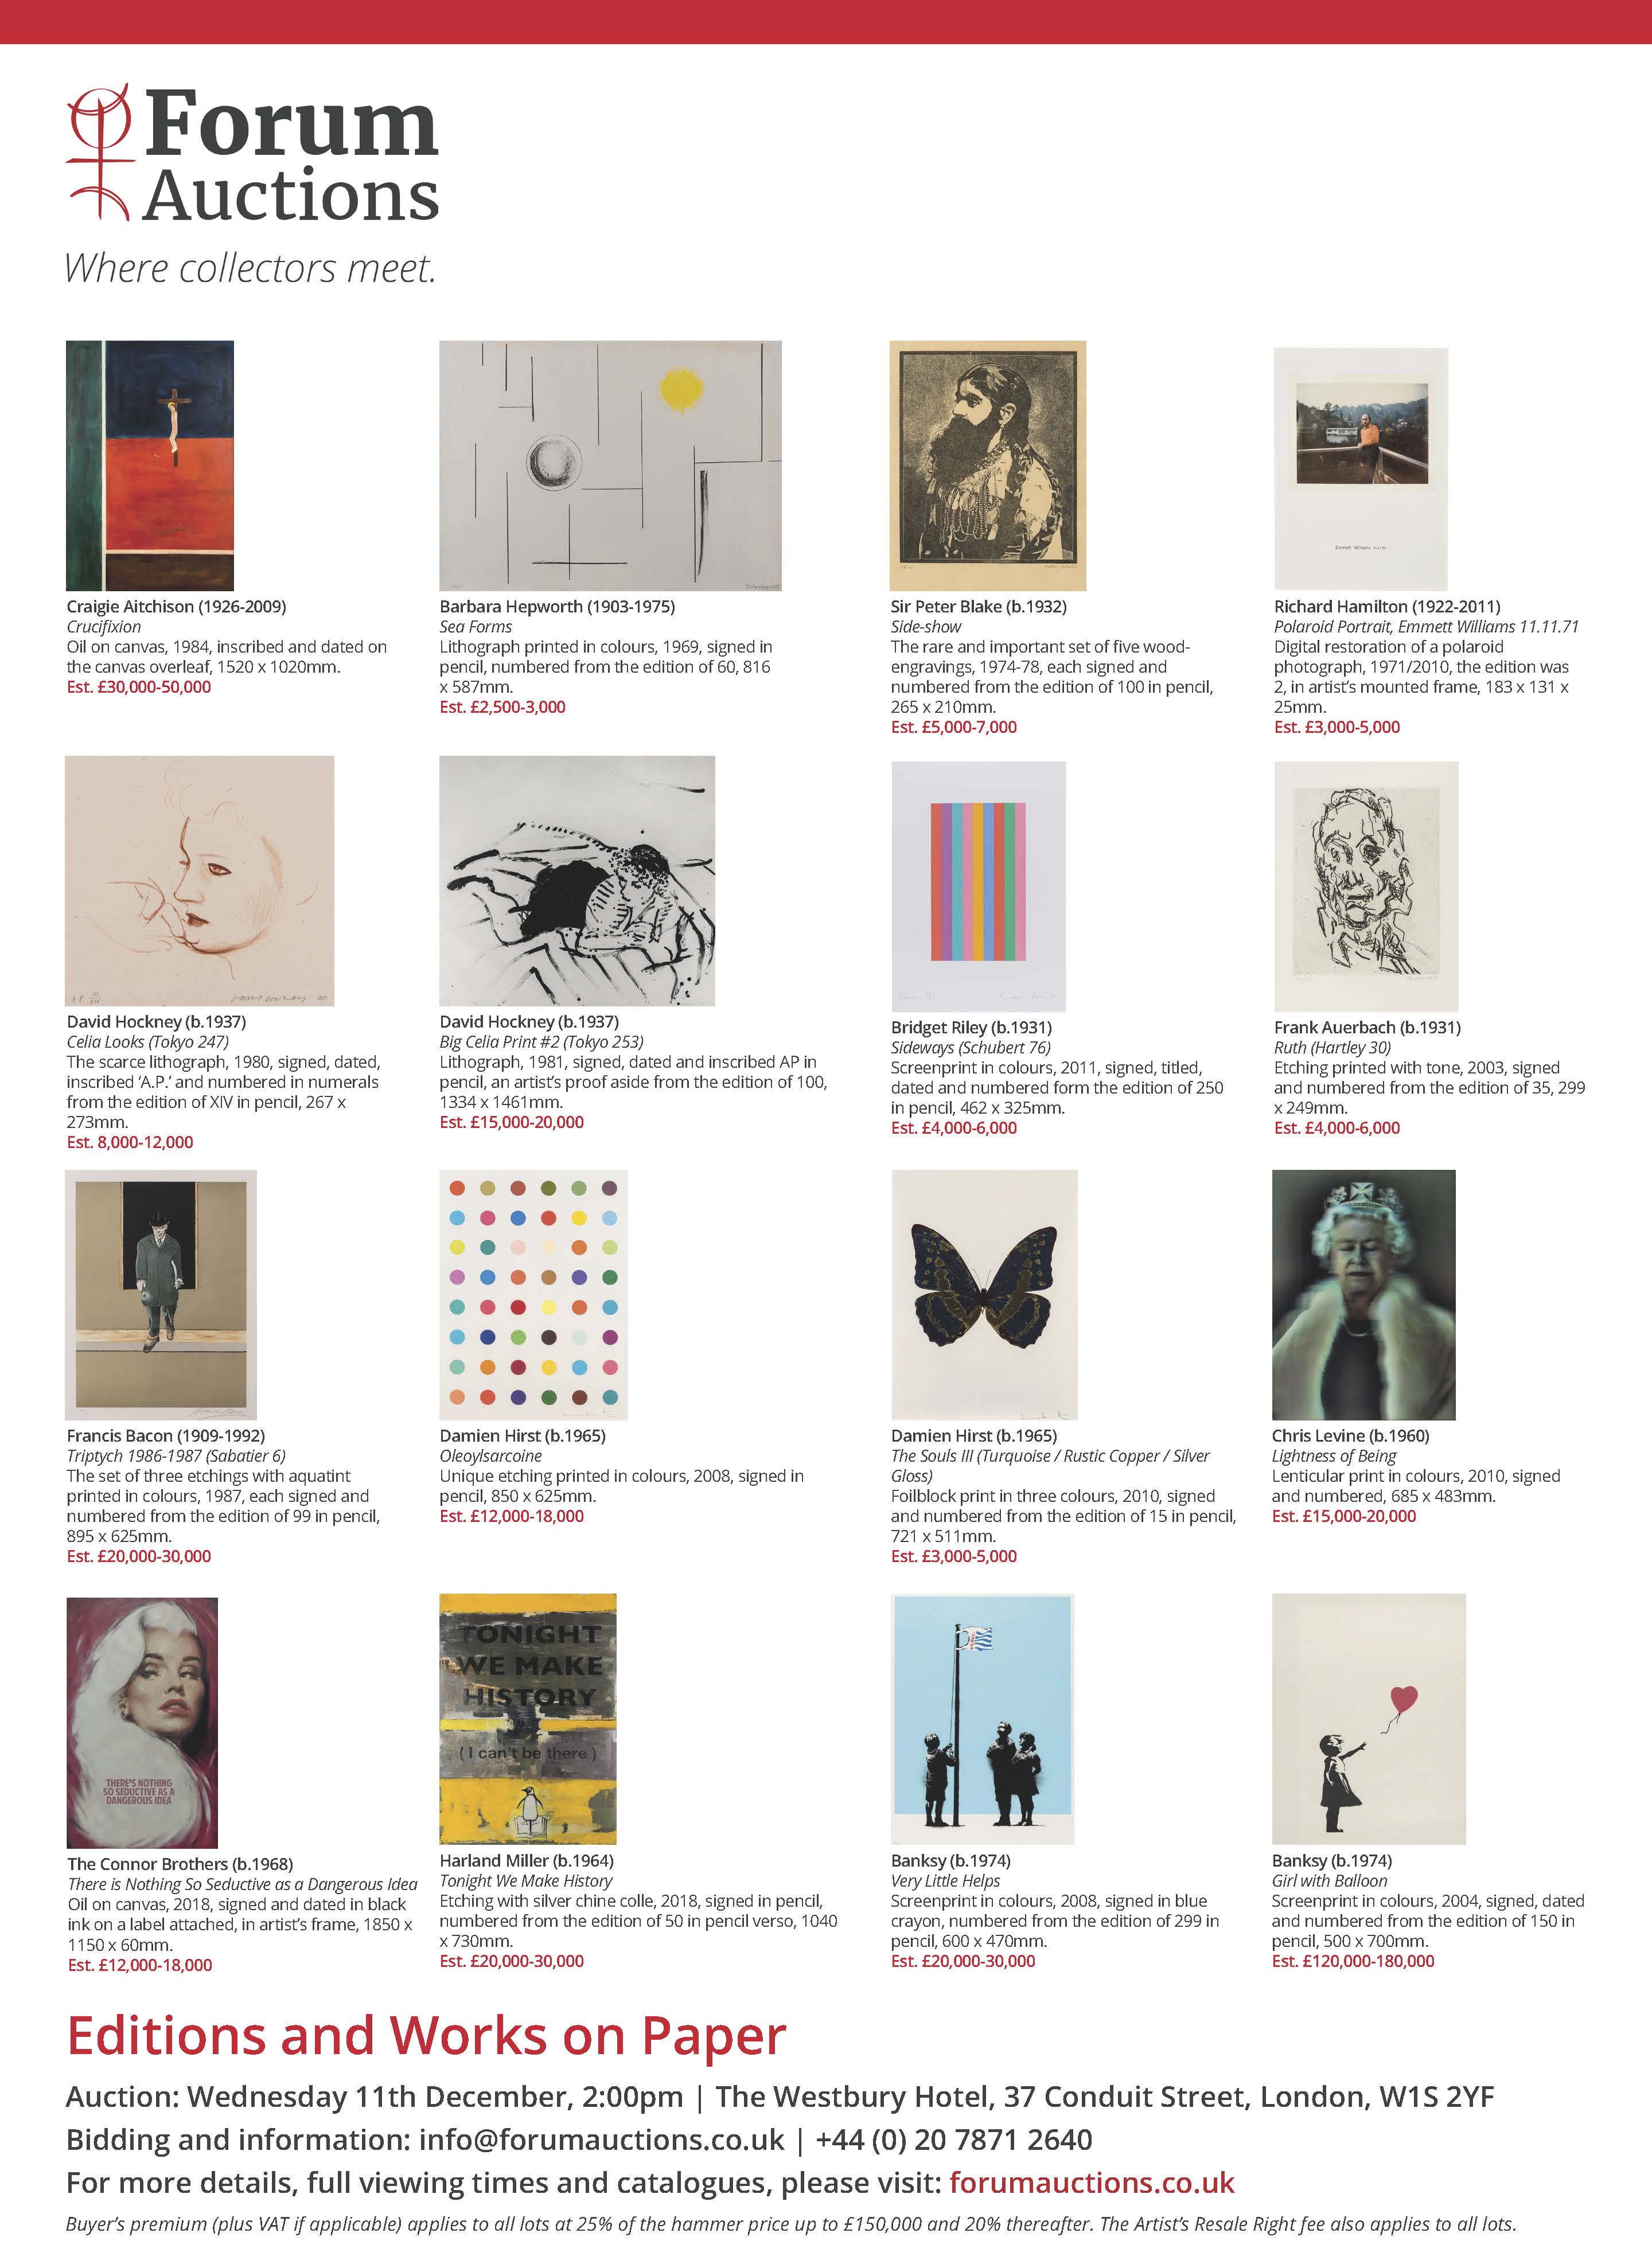 Forum - Editions & Works on Paper.jpg